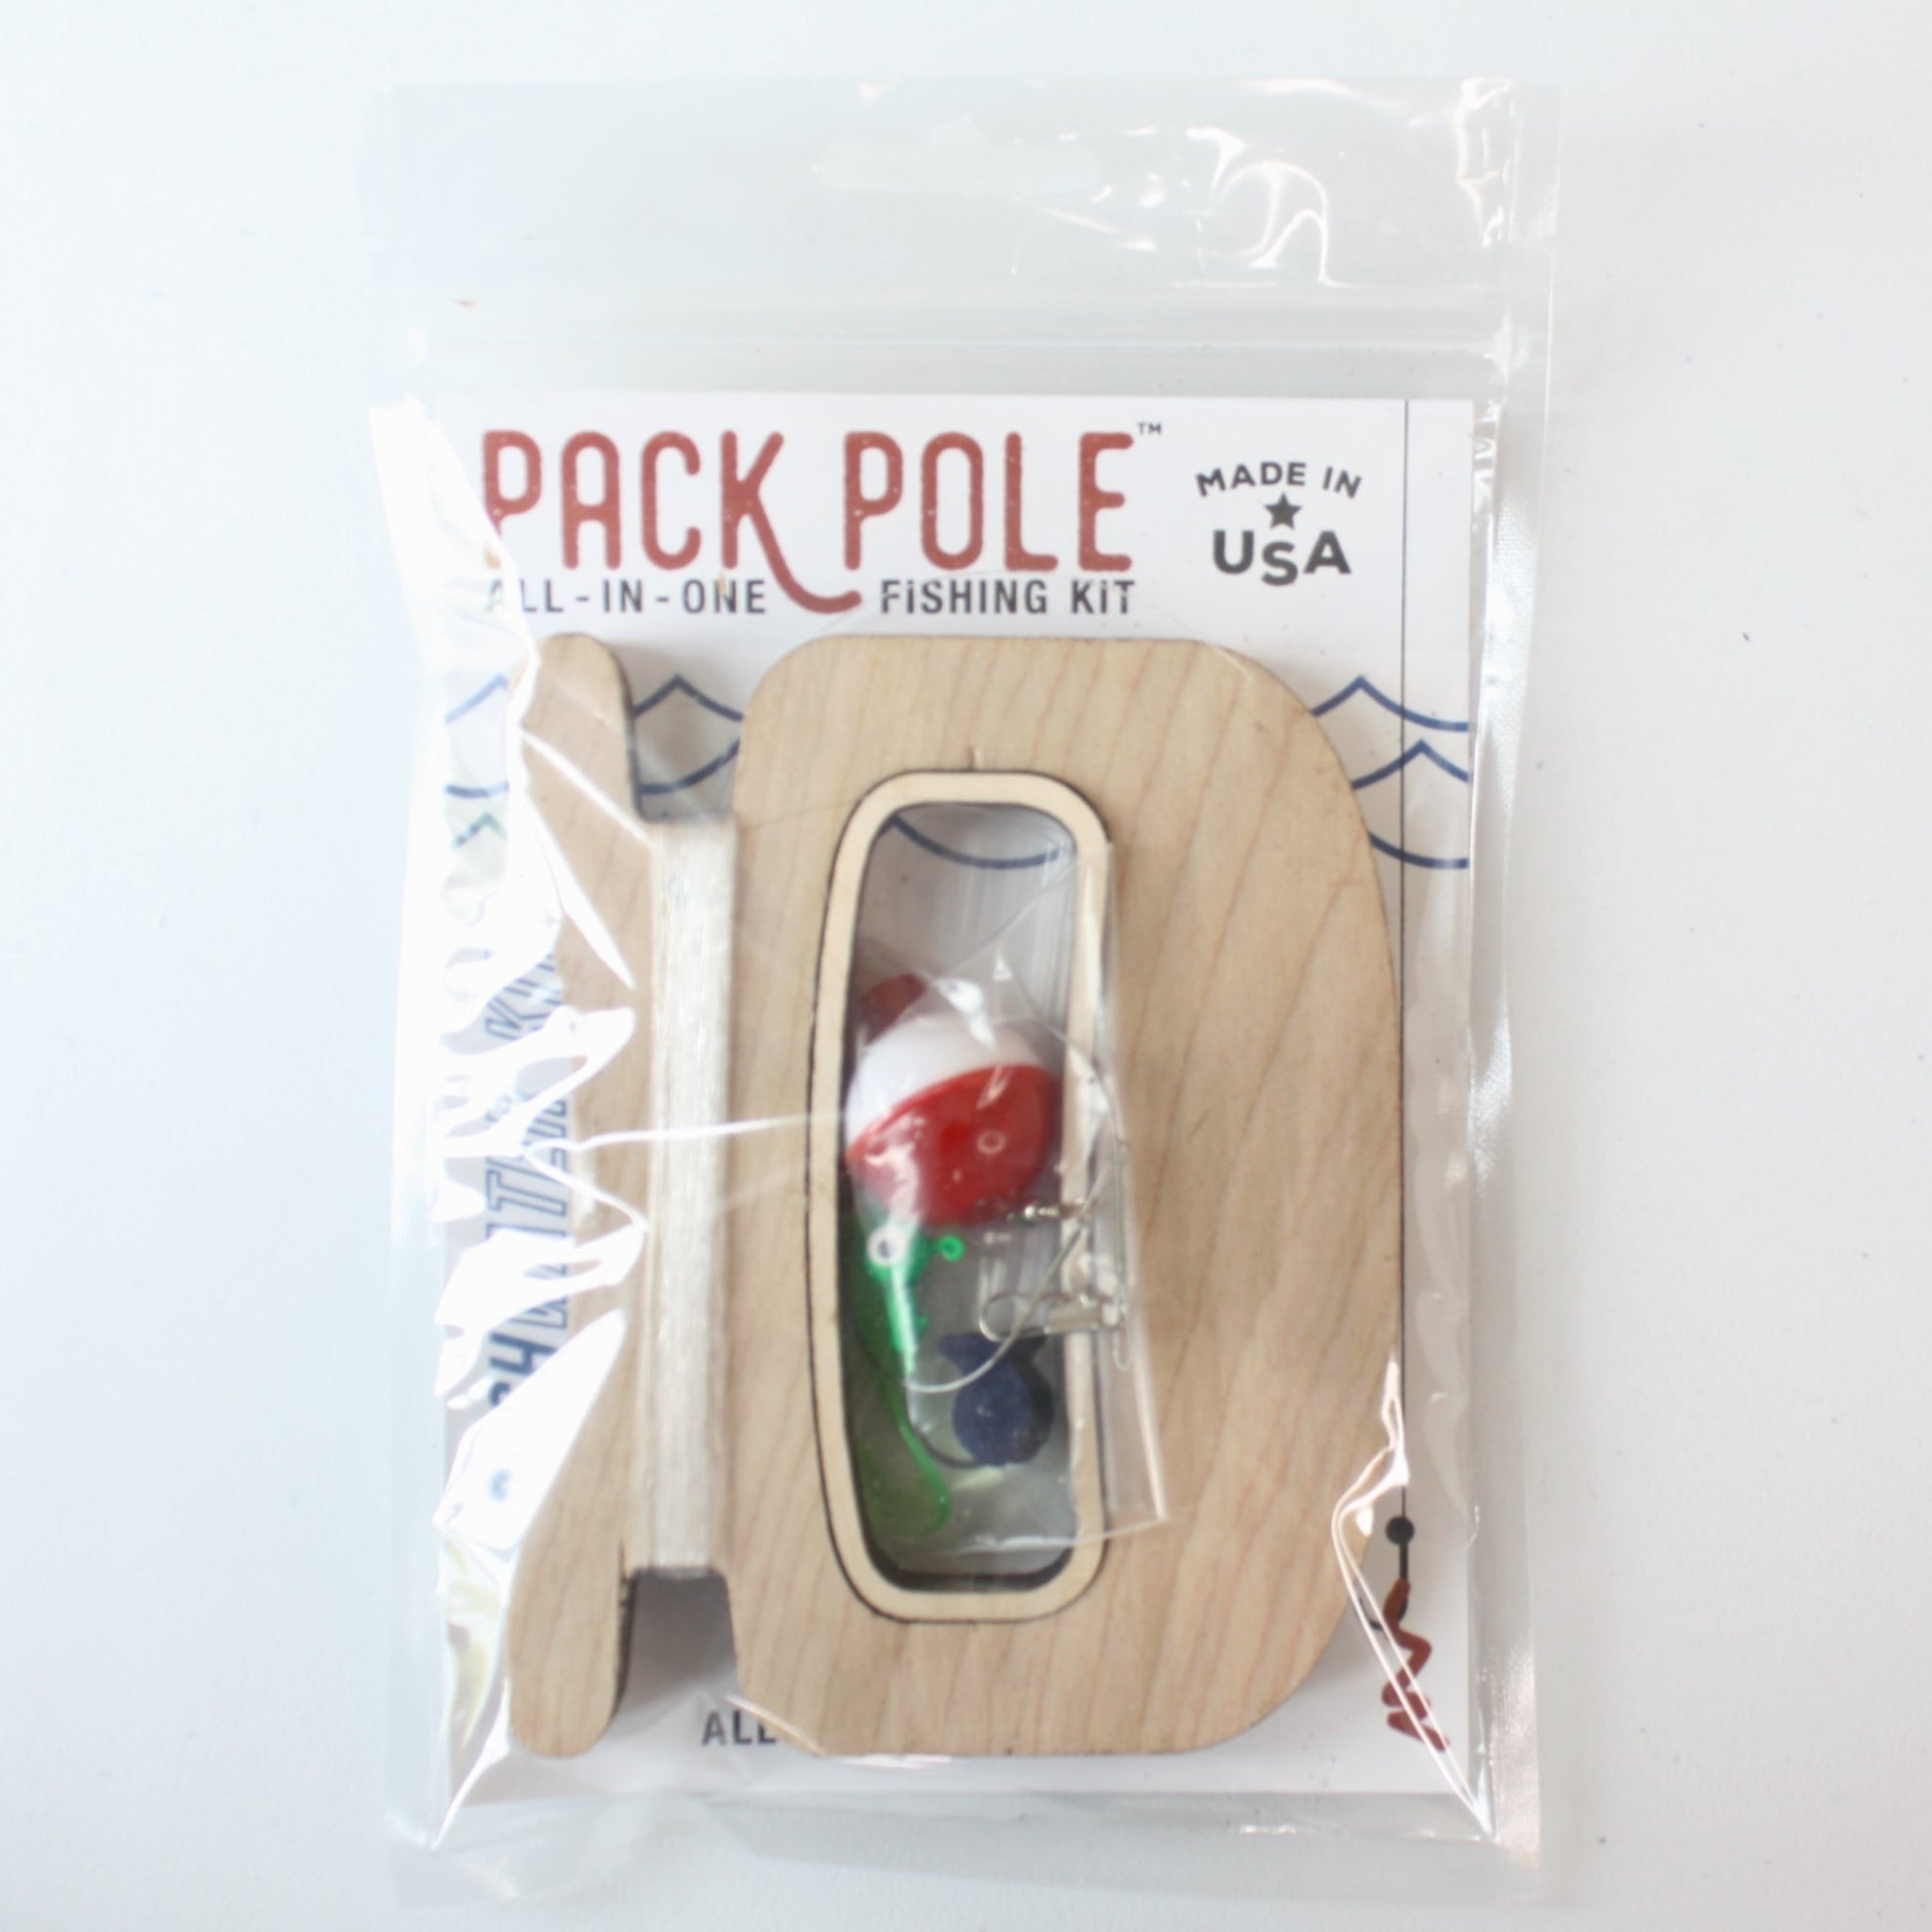 Pack Pole Emergency Fishing Kit - Proudly made in the USA